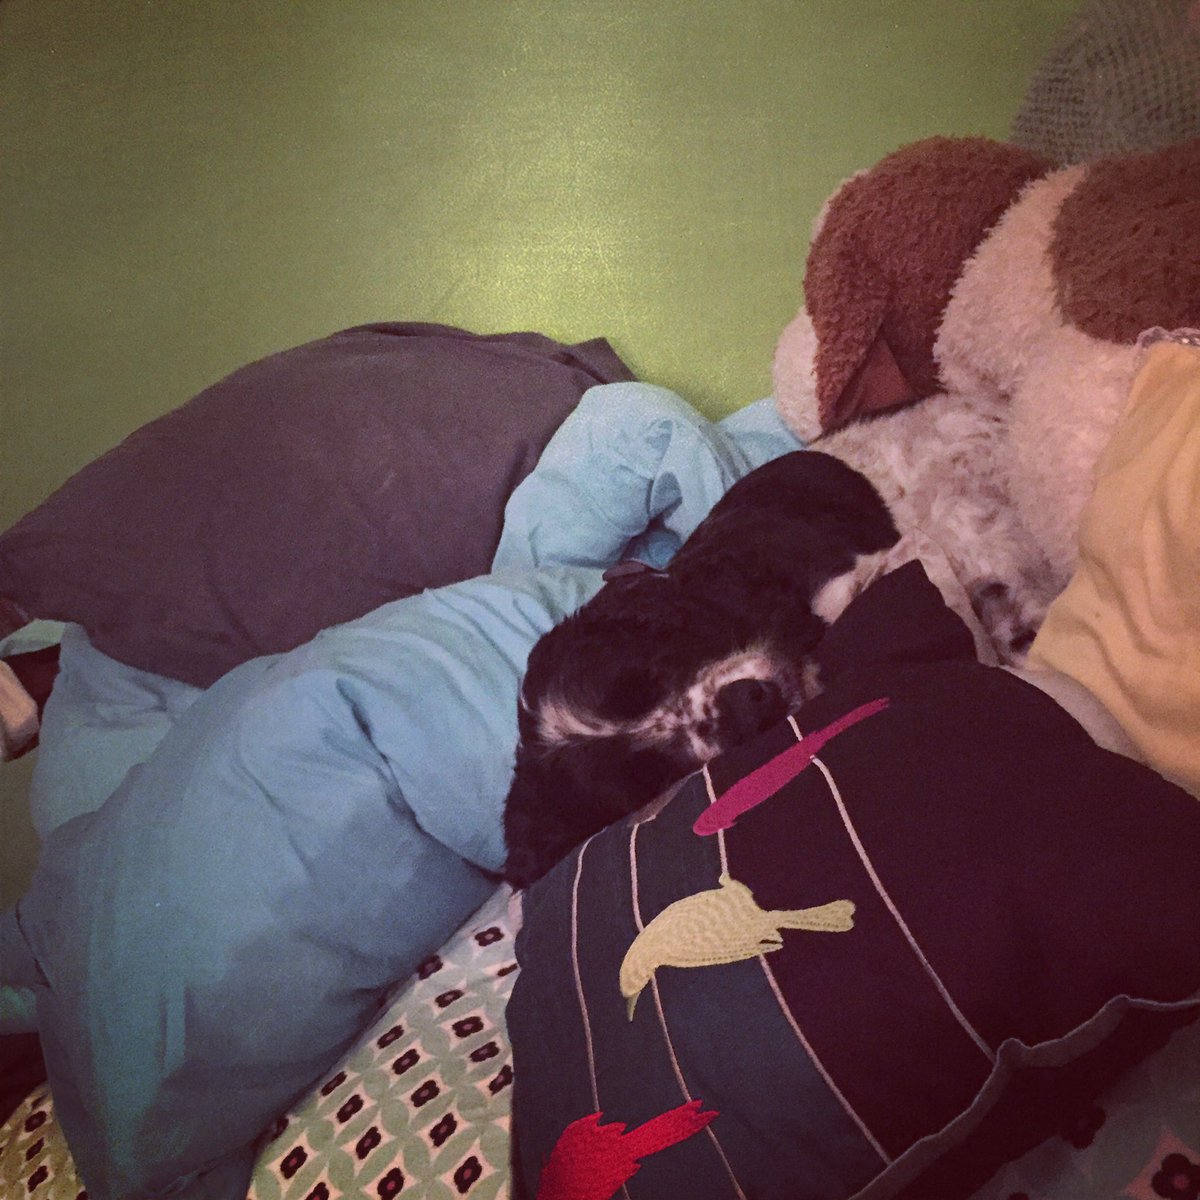 My dog is in pillow heaven right now #pillowland #nowakeuptime #professionalsnuggler